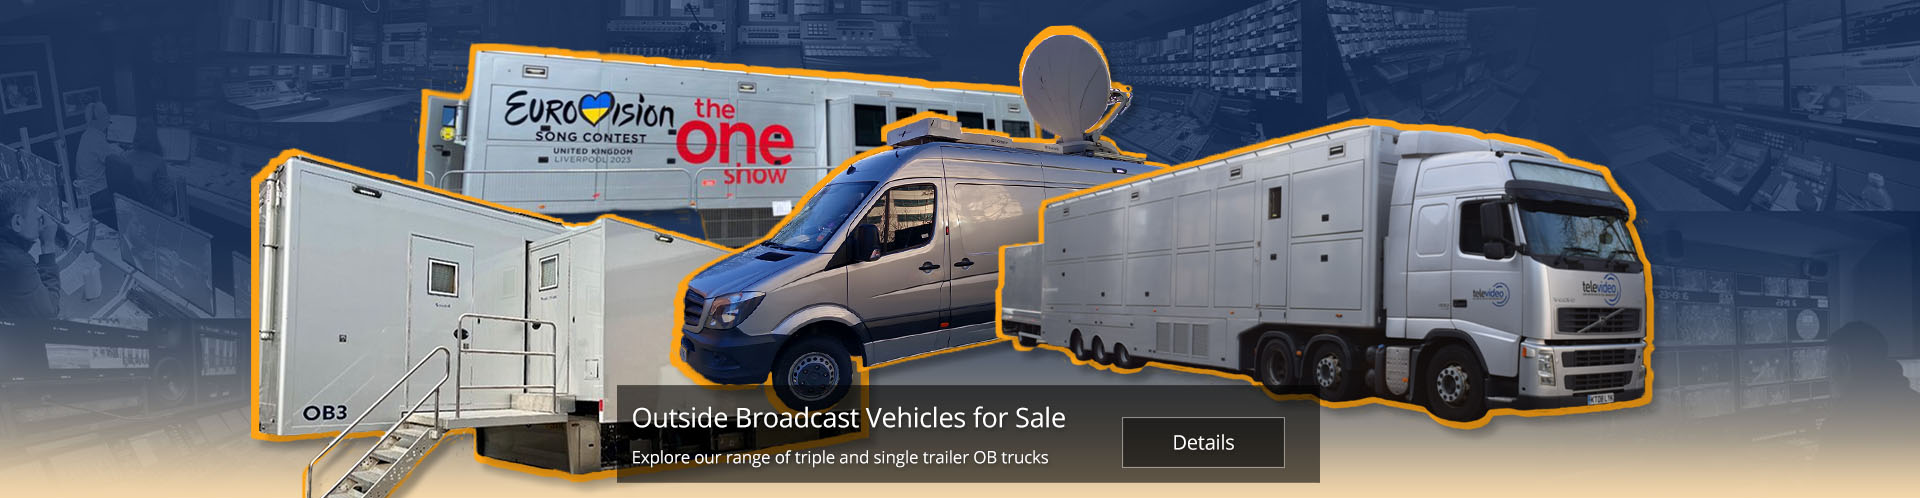 Outside Broadcast Vehicles for Sale